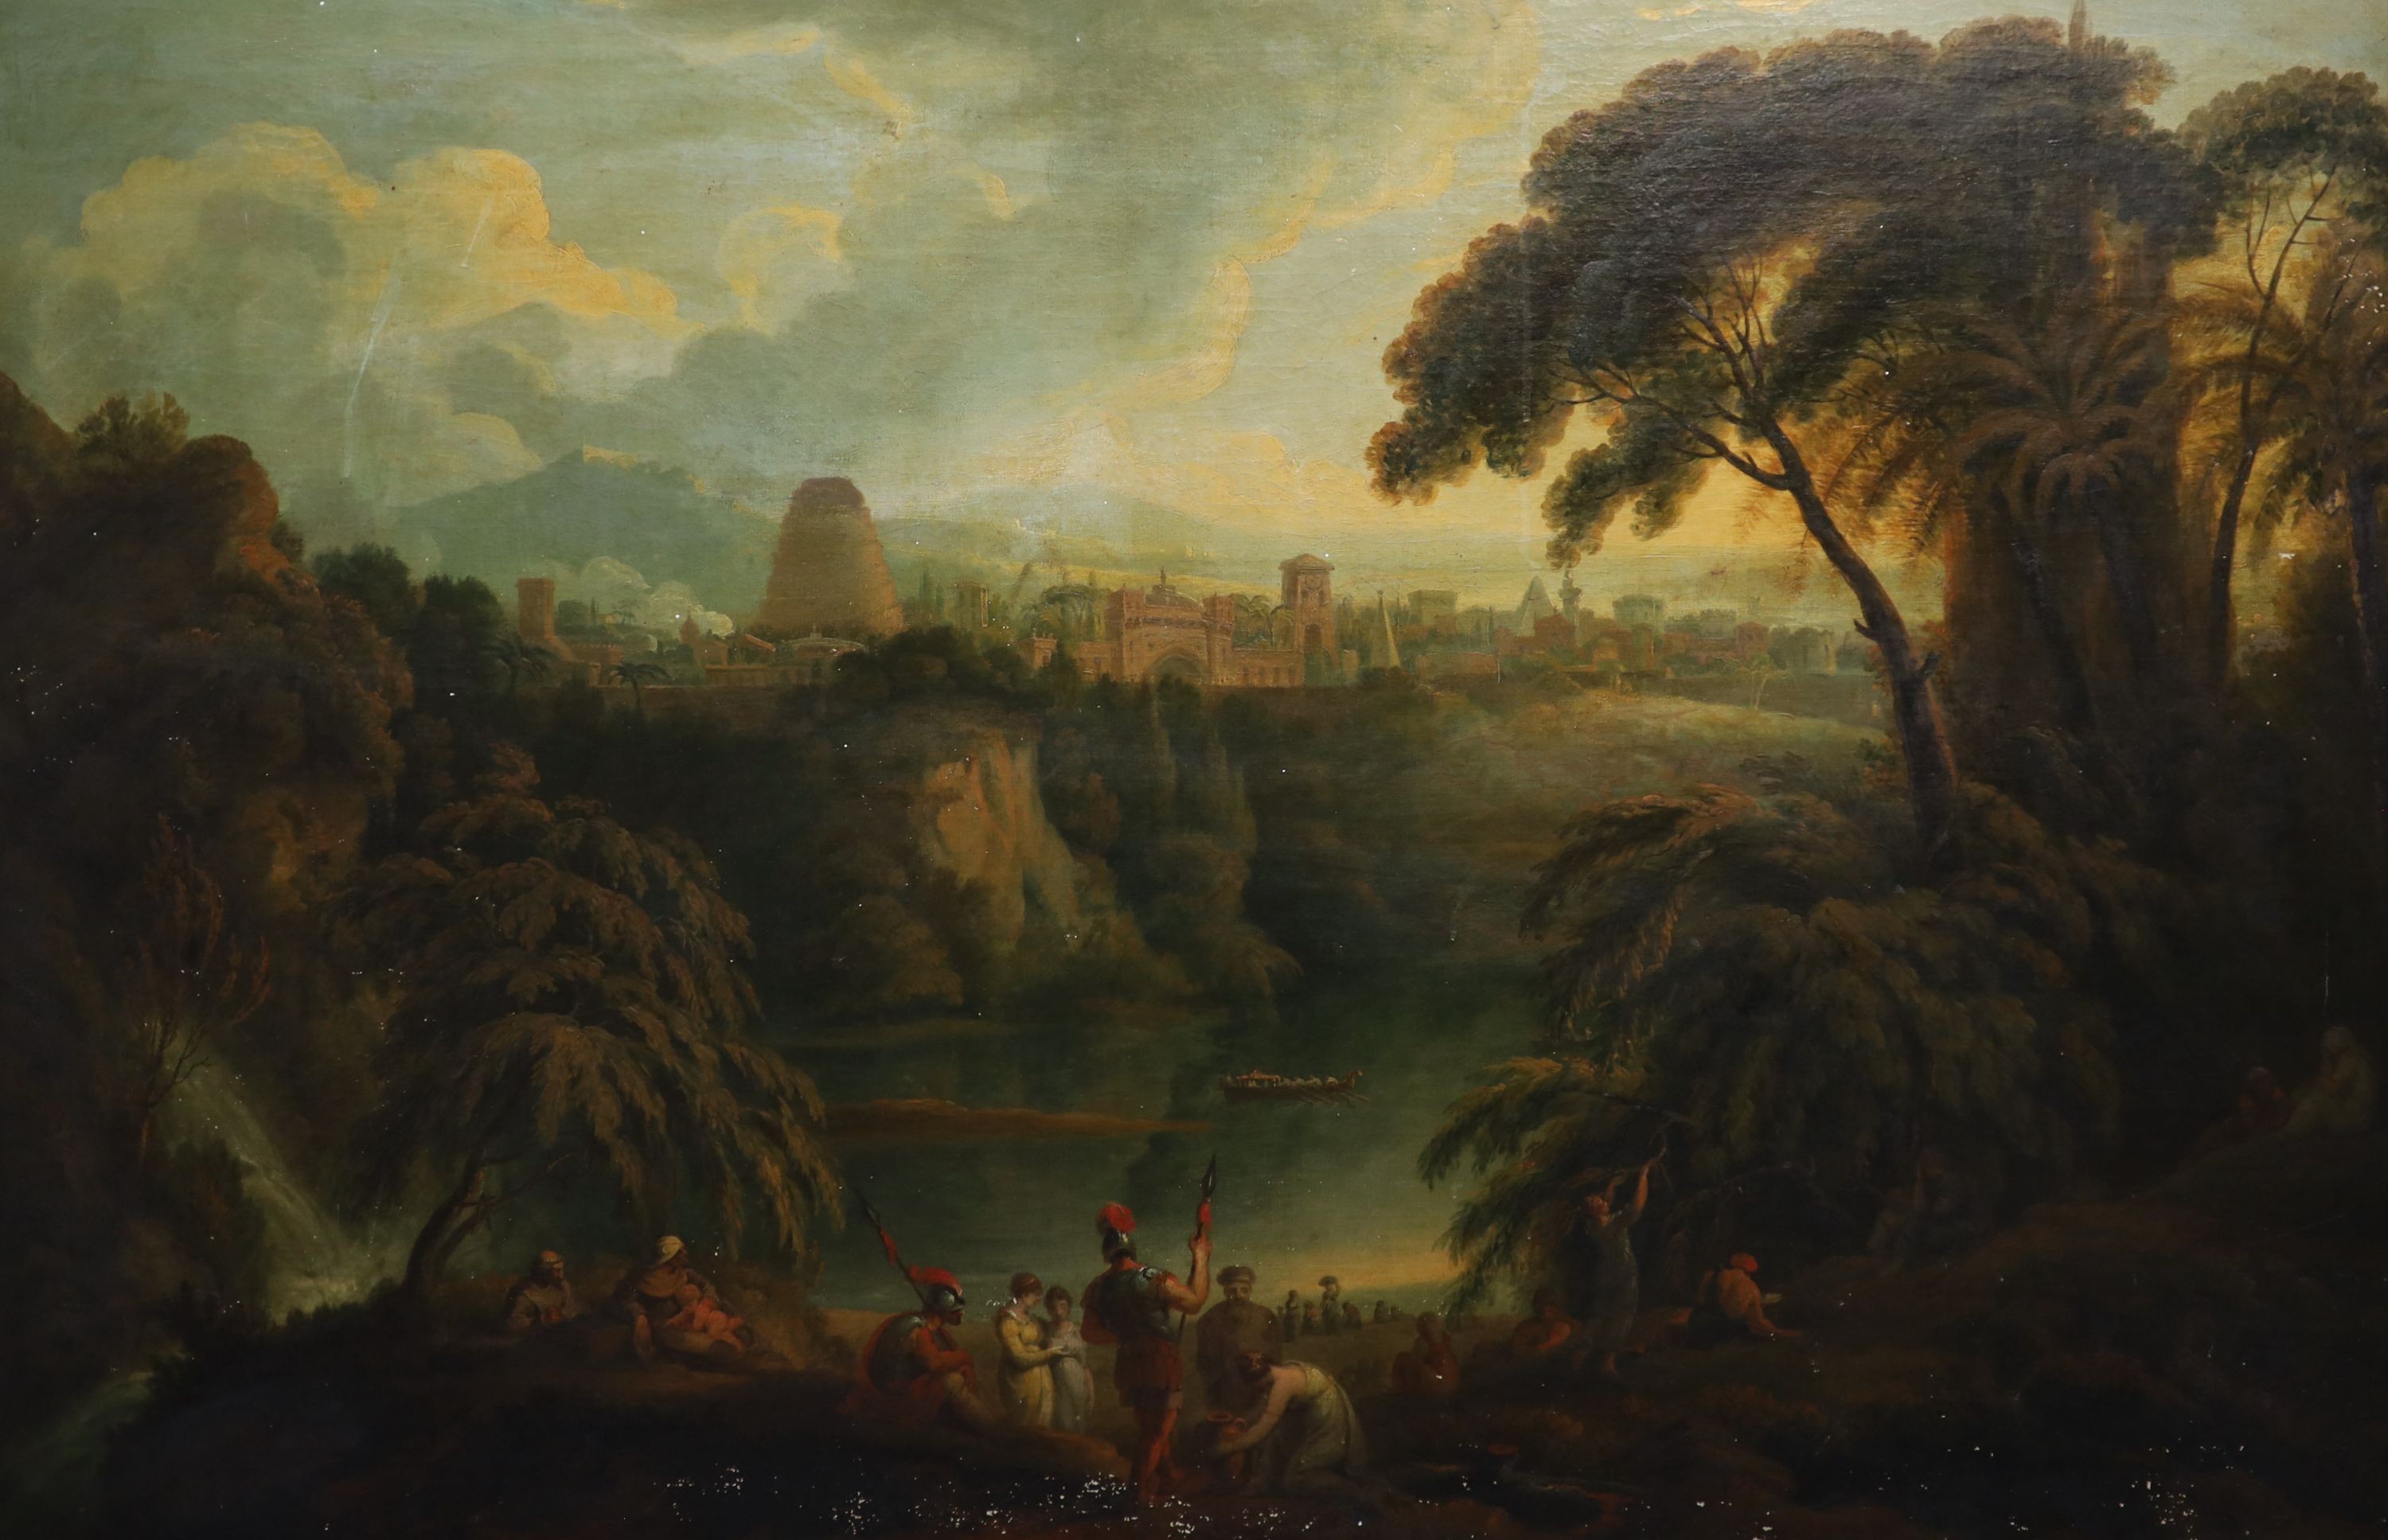 J. Janvers (18/19th C), Italianate landscape with Roman figures in the foreground and a city beyond, Oil on canvas, 90 x 136cm.